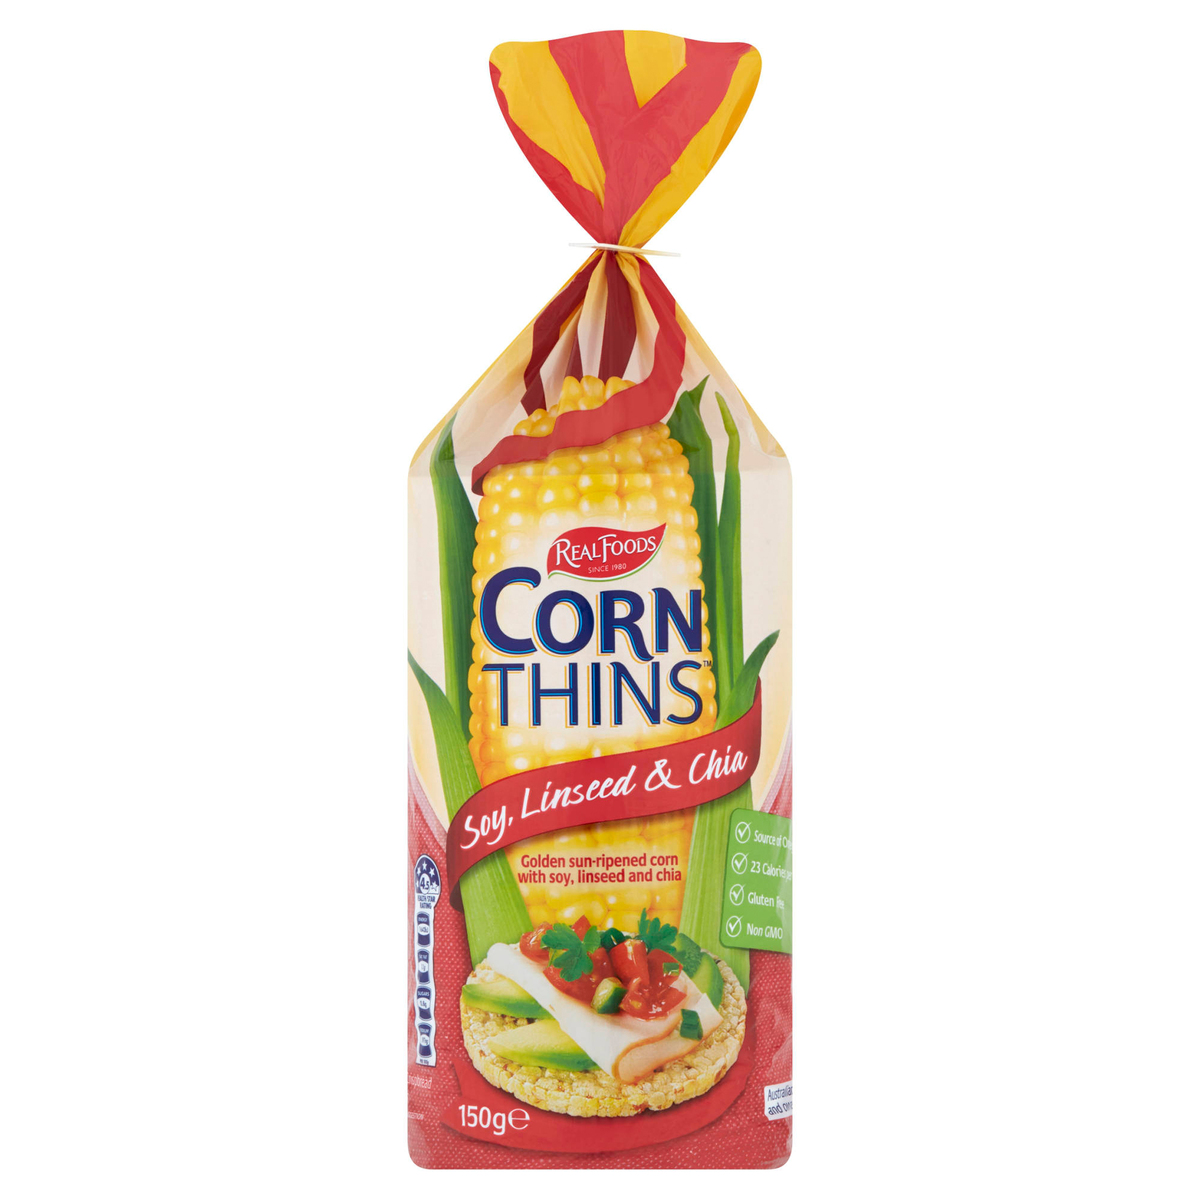 Real Foods Corn Thins Soy, Linseed & Chia Gluten Free 150 g